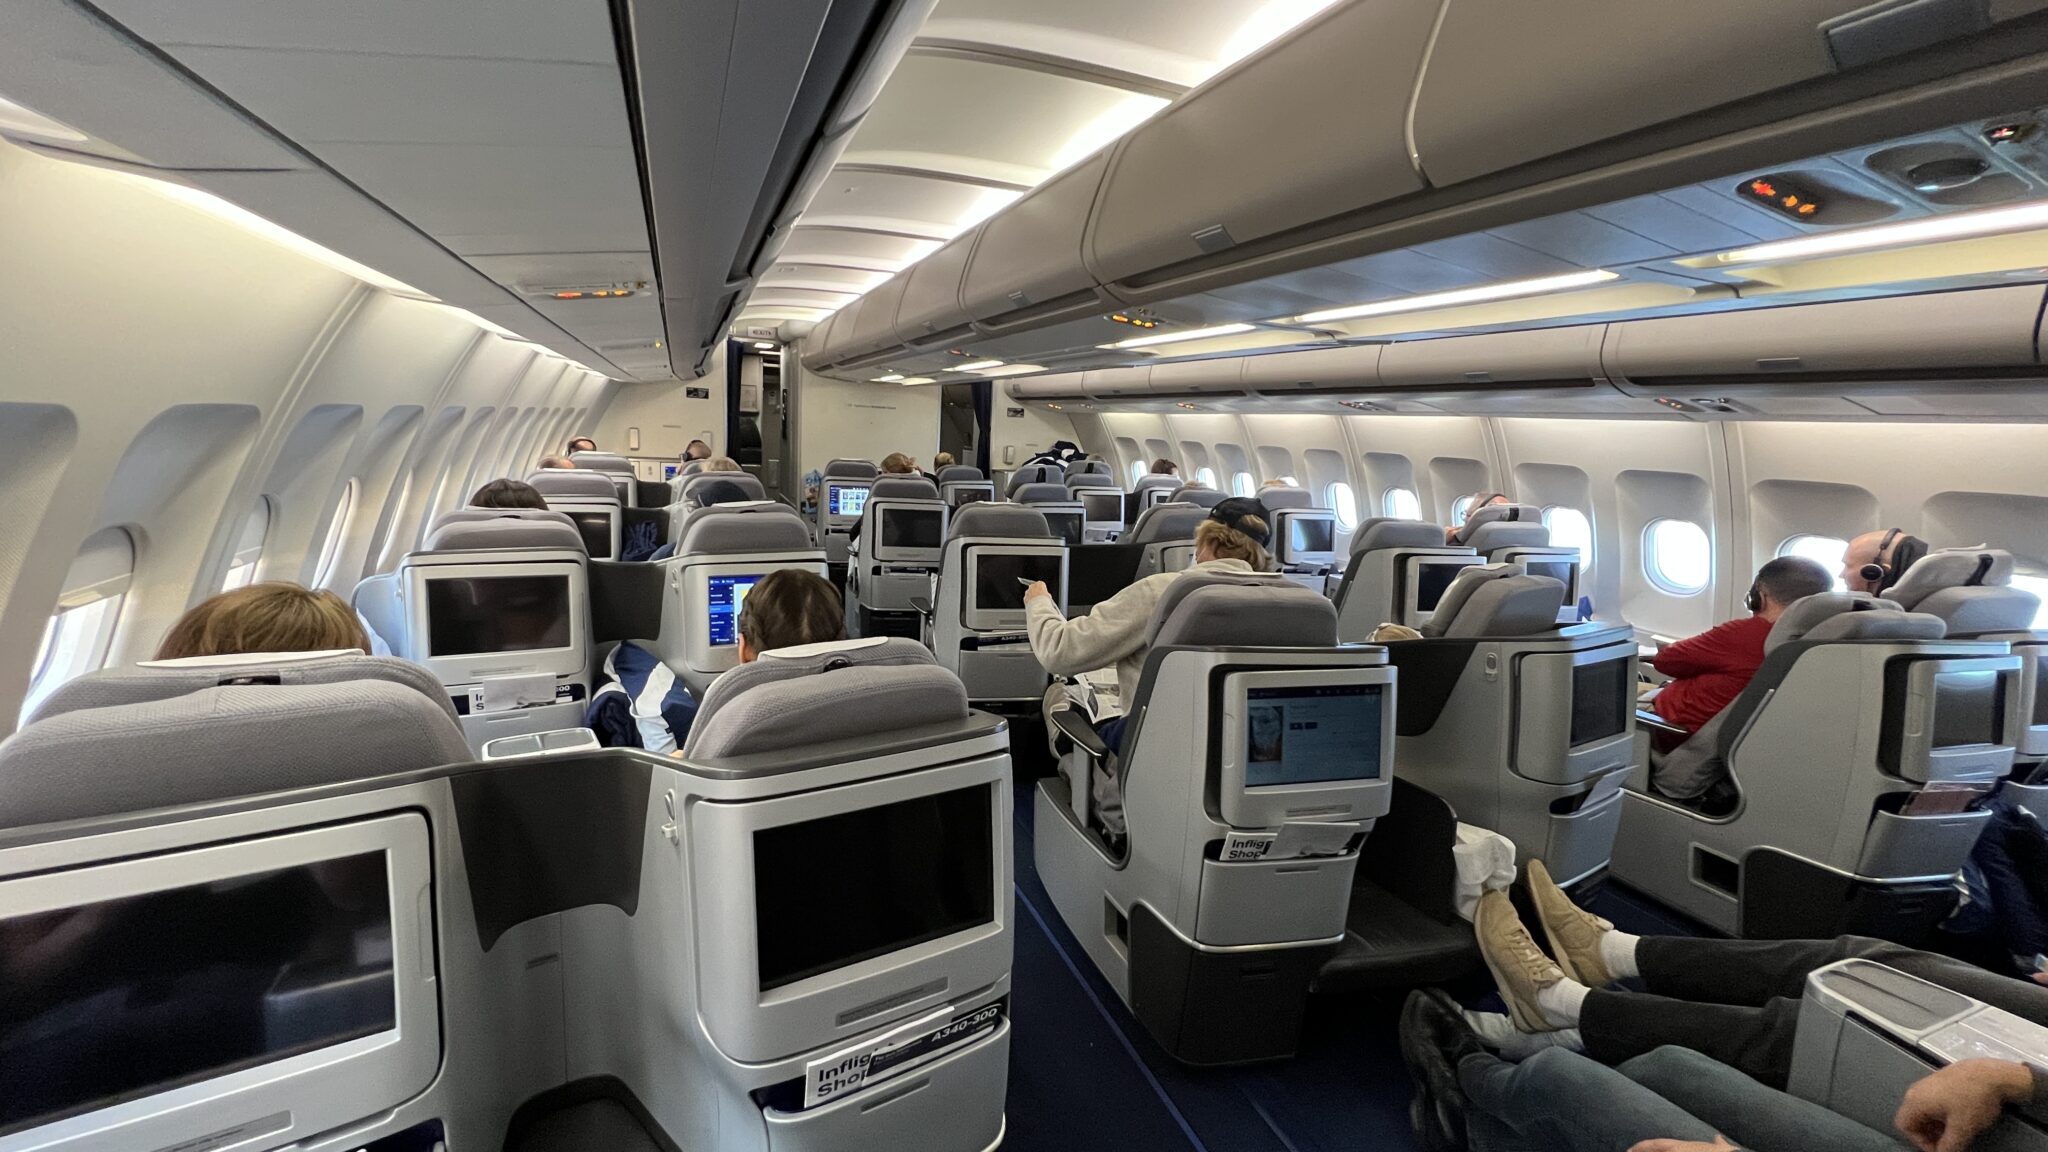 We Review A Very Tired Lufthansa Business Class Atlanta To Frankfurt